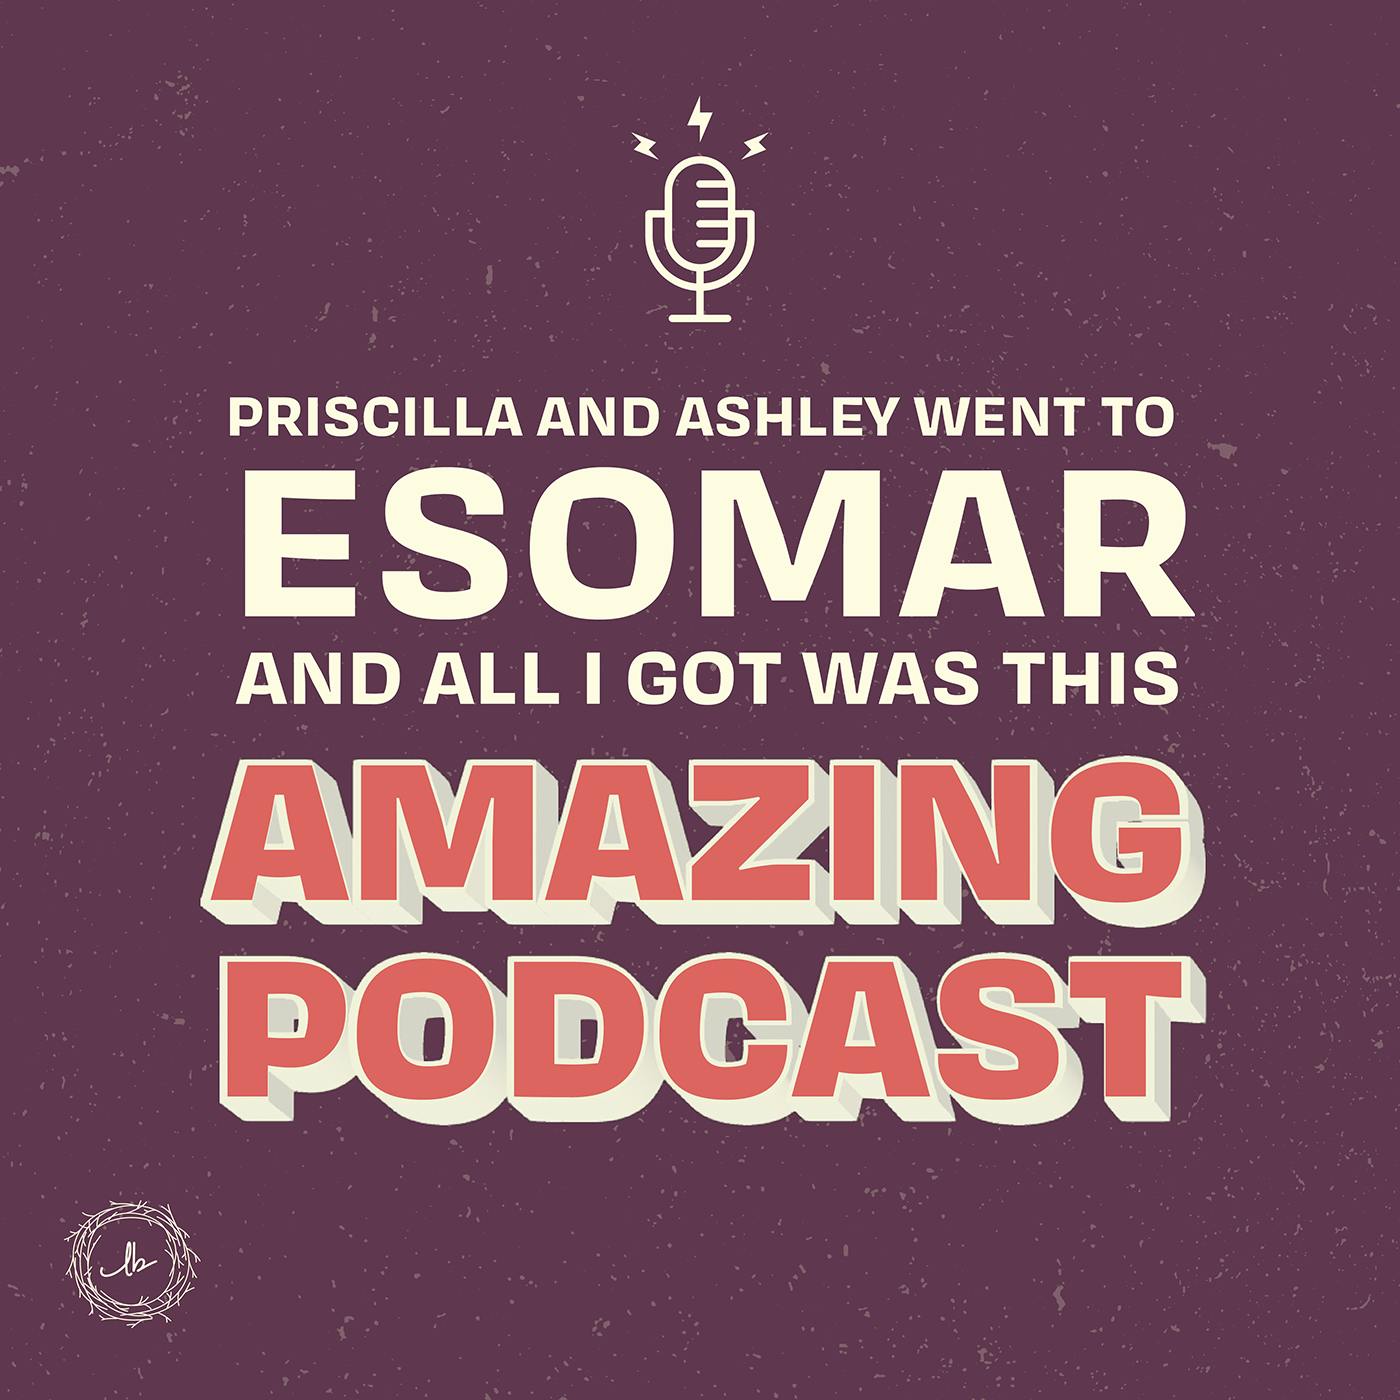 Priscilla and Ashley Went to ESOMAR and All I Got Was This Amazing Podcast!